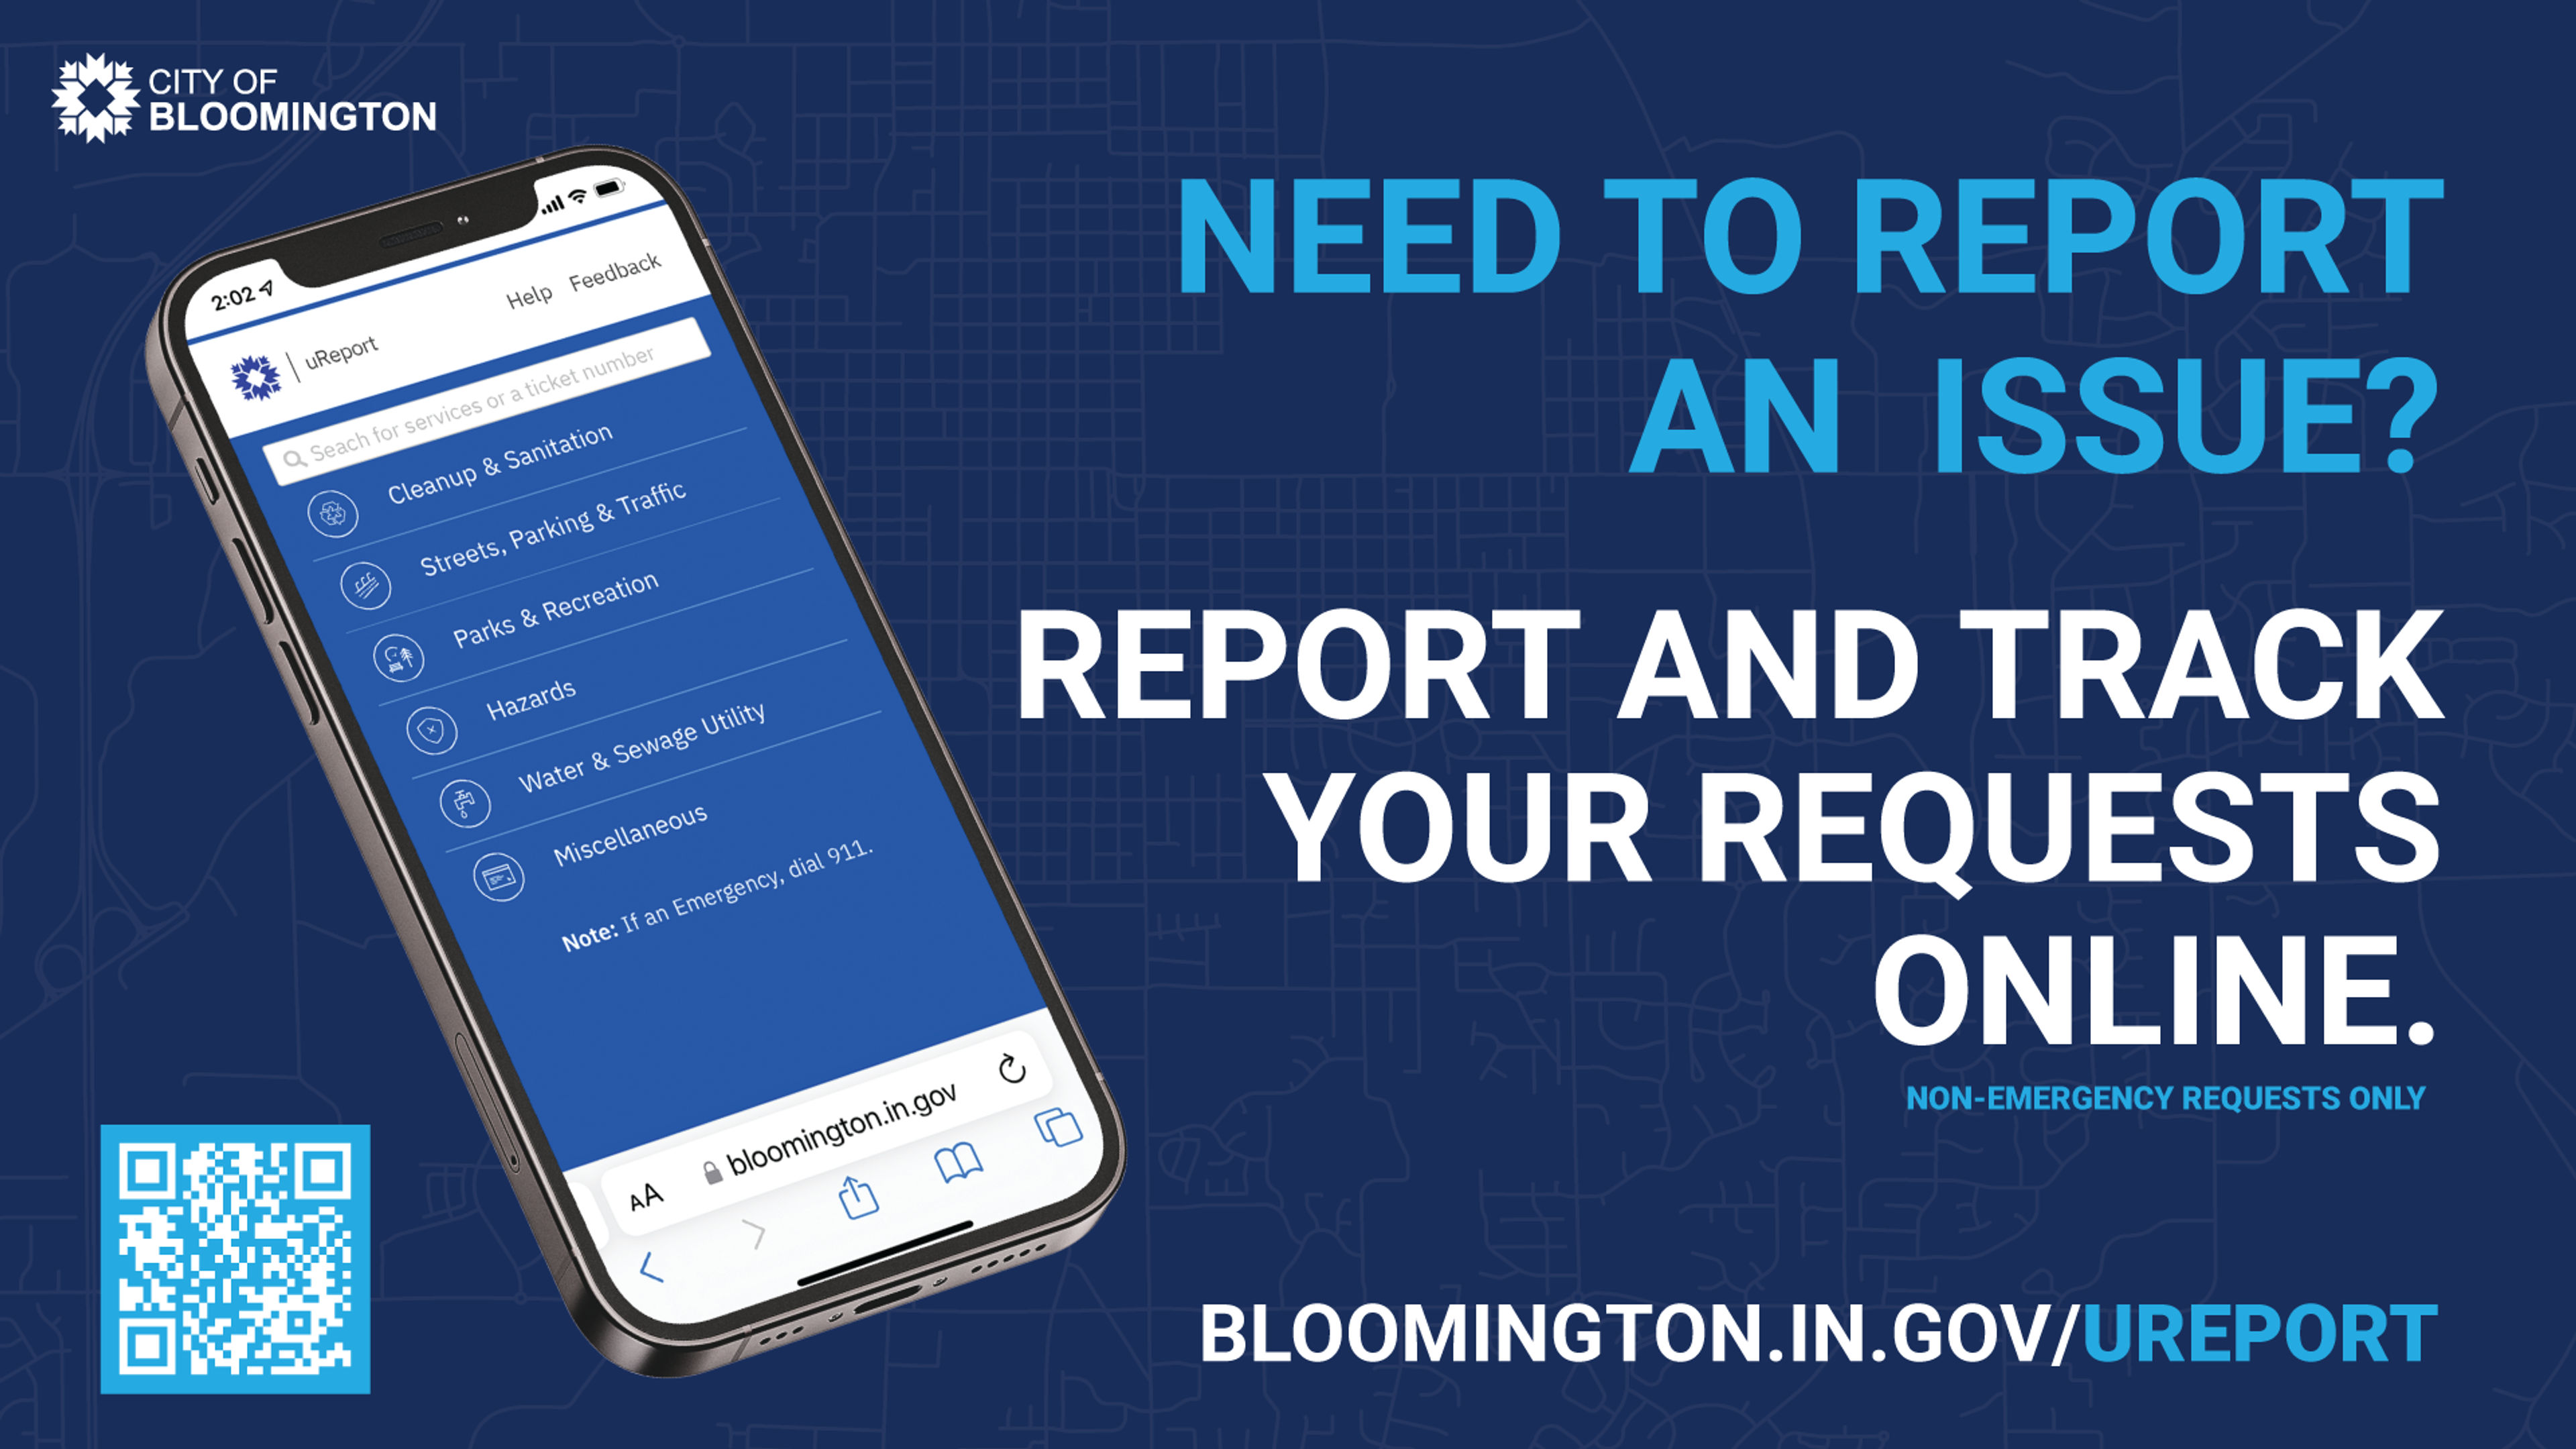 Need to report an issue? Visit: bloomington.in.gov/ureport 